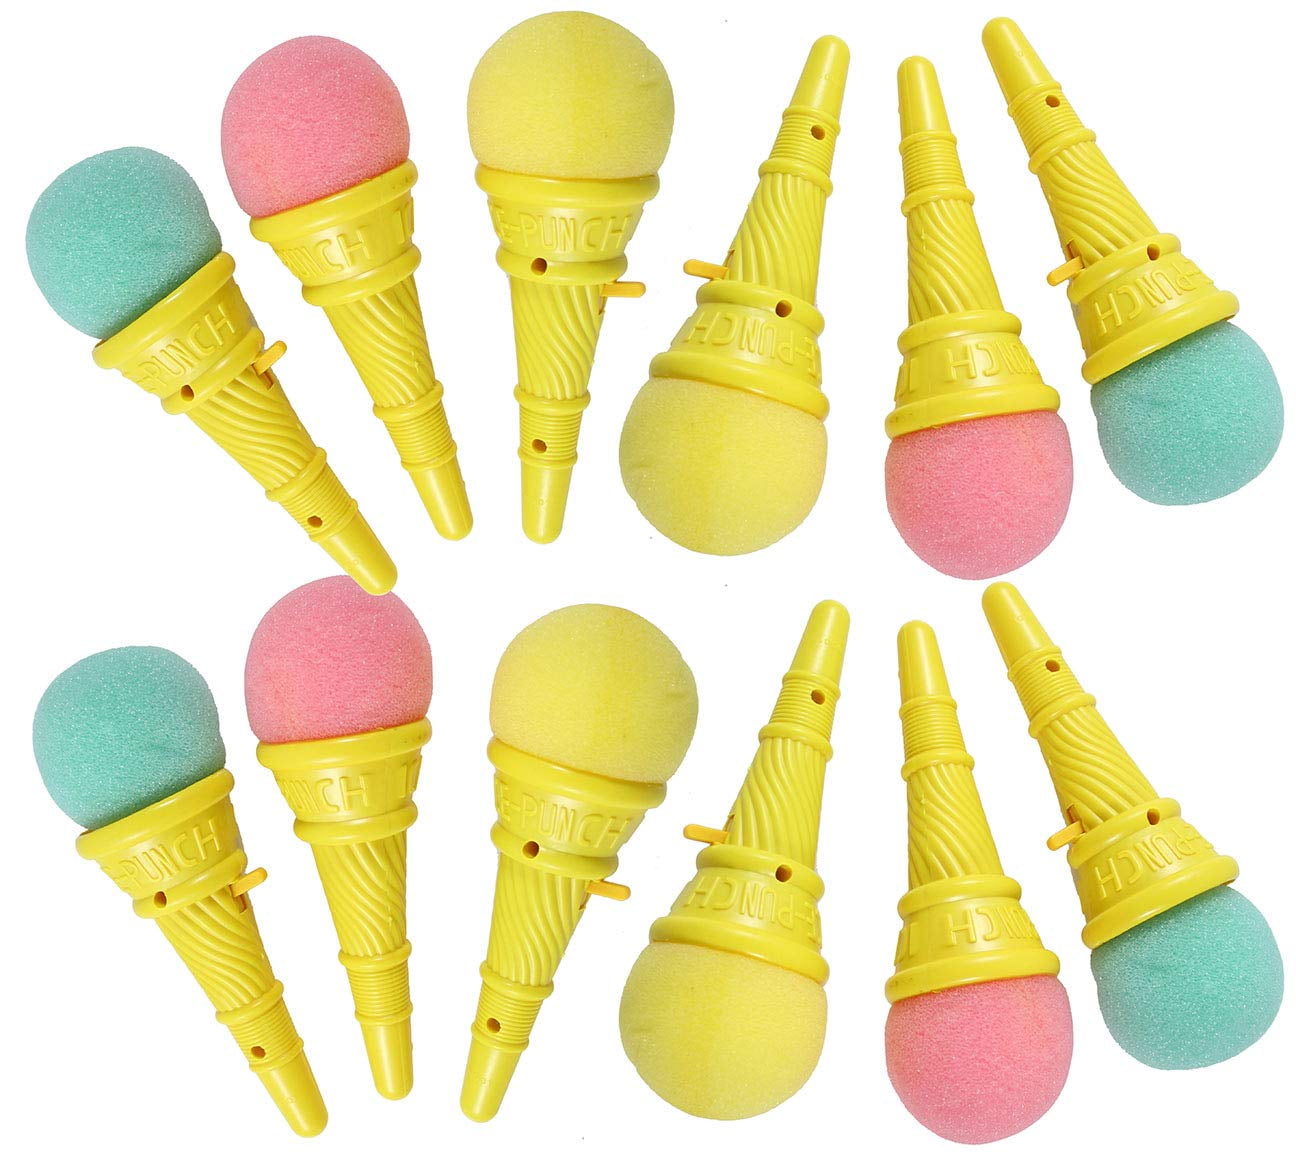 Fun Express Plastic Sport Ball Ice Cream Cone Shooters Pack of 12